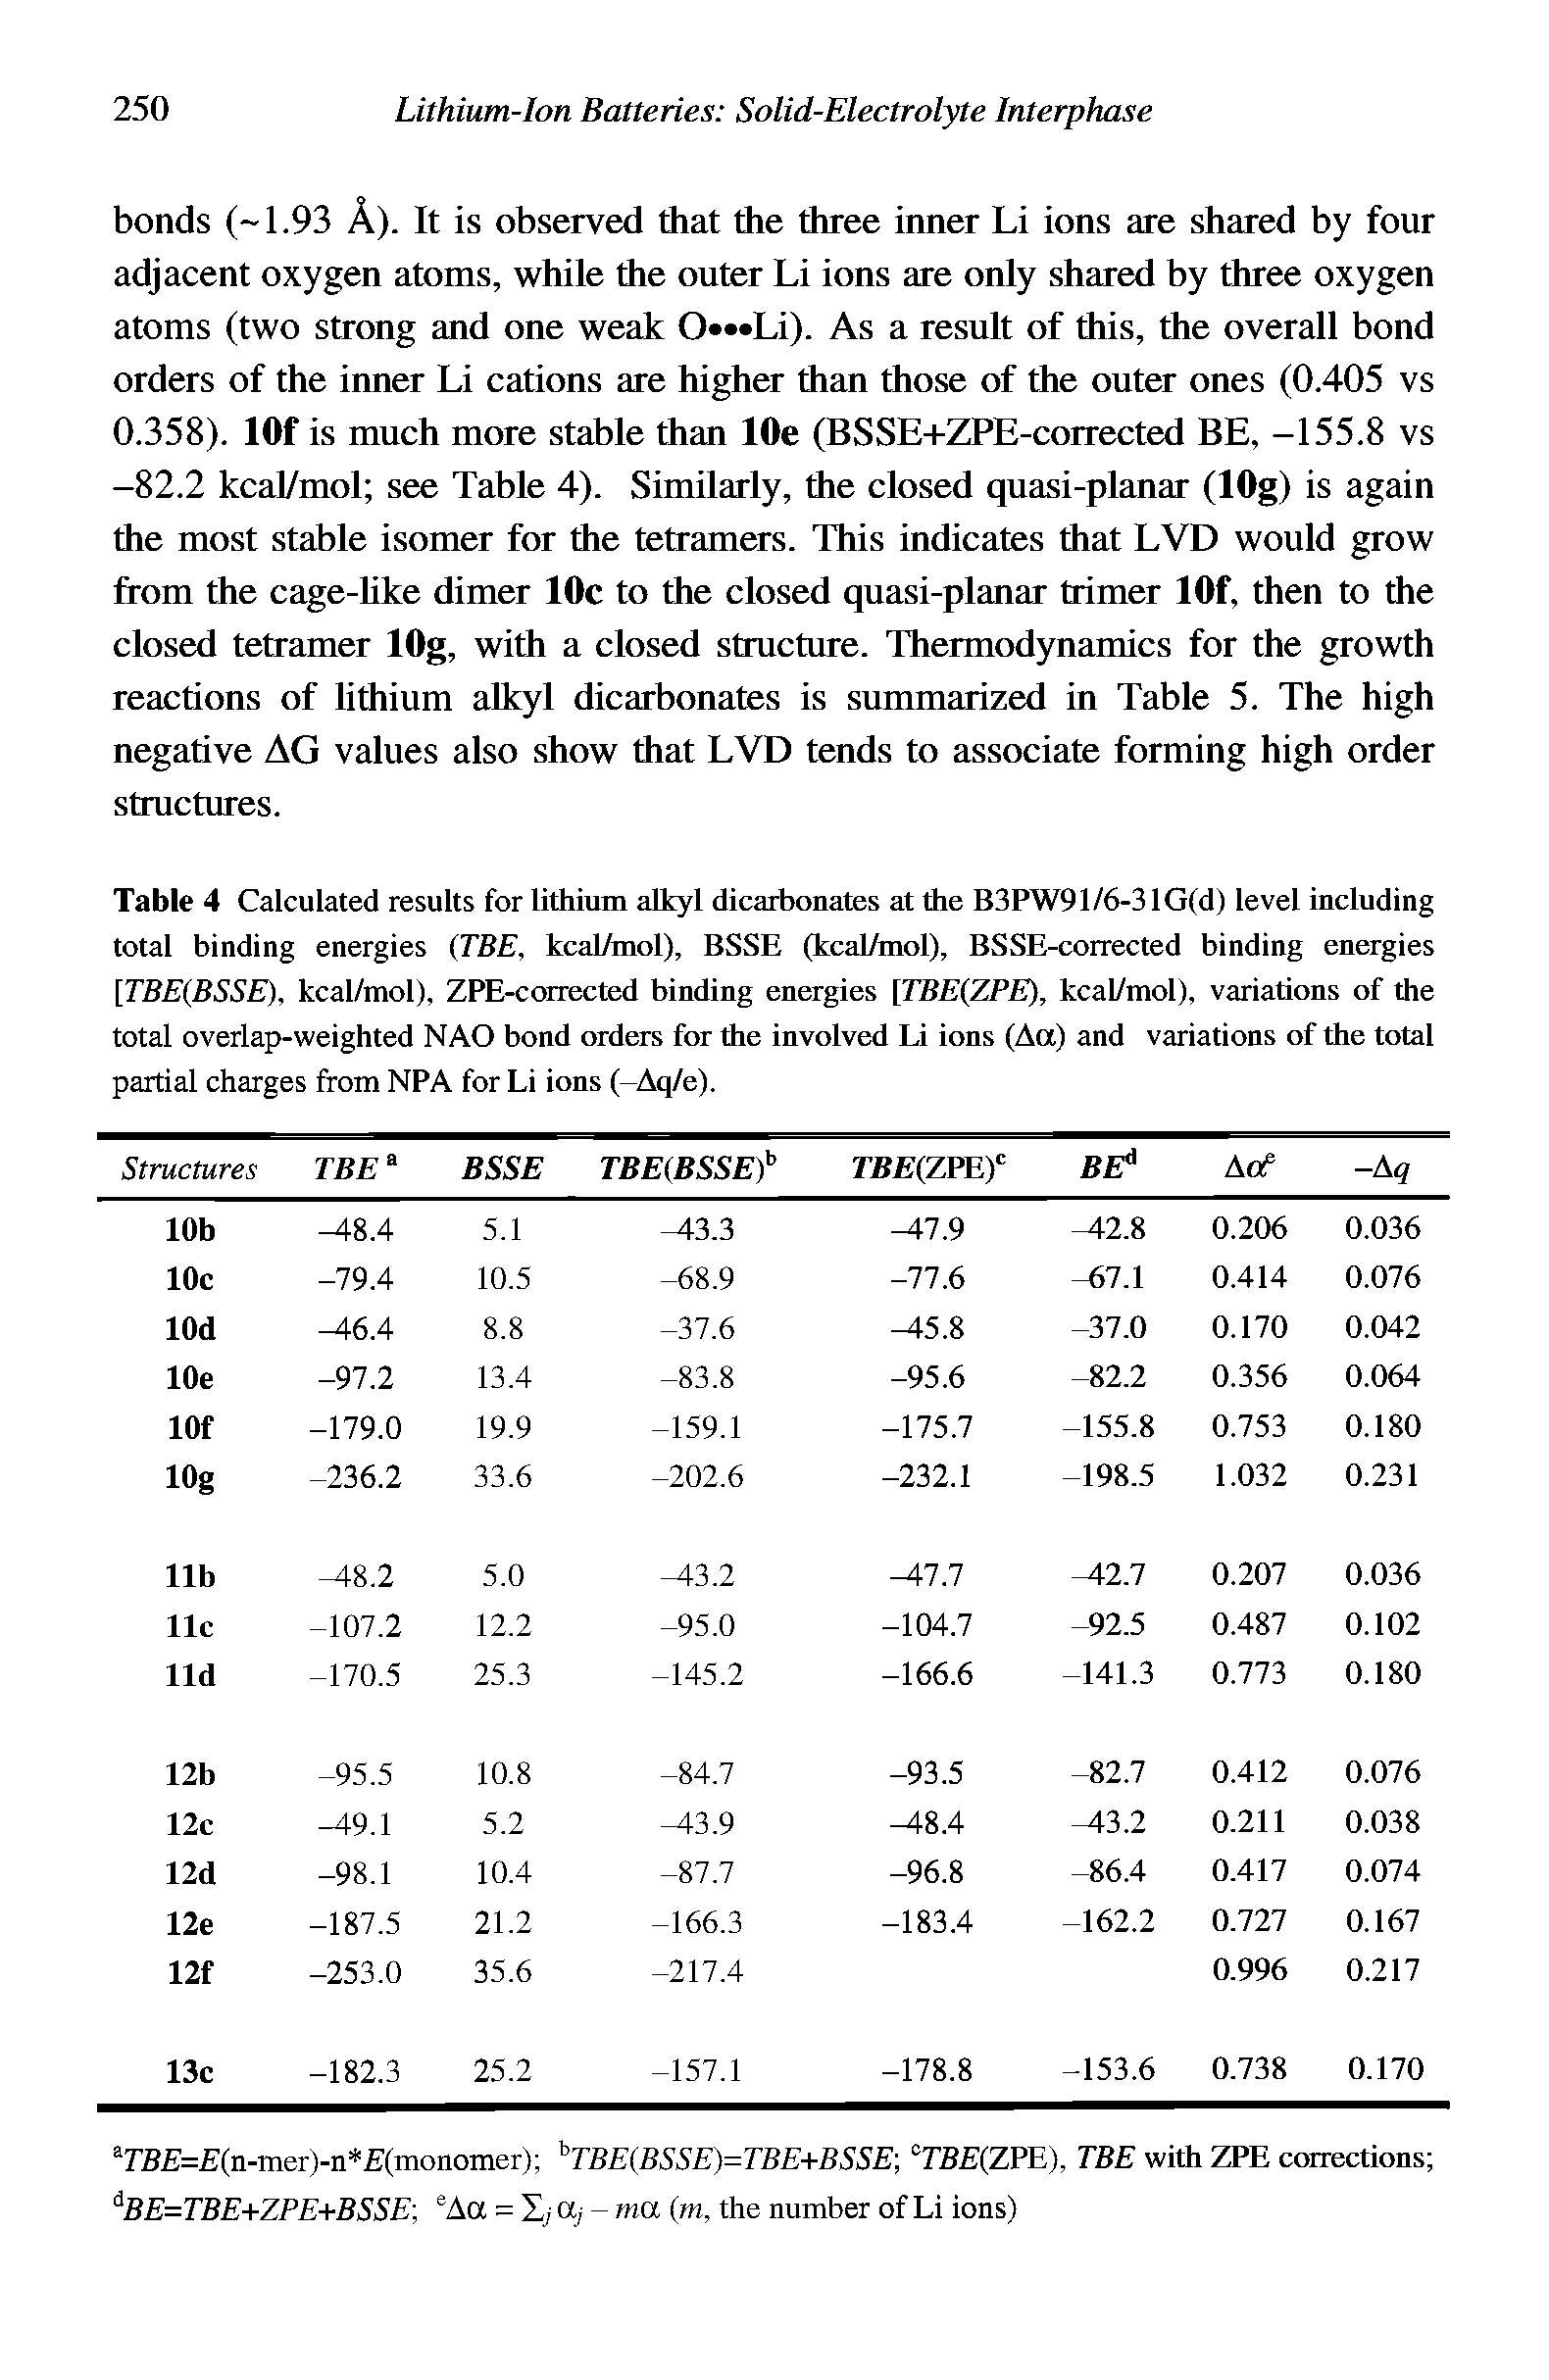 Table 4 Calculated results for lithium alkyl dicarbonates at the B3PW91/6-31G(d) level including total binding energies (TBE, kcal/mol), BSSE (kcal/mol), BSSE-corrected binding energies [TBE(BSSE), kcal/mol), ZPE-corrected binding energies [TBE(ZPE), kcal/mol), variations of the total overlap-weighted NAO bond orders for the involved Li ions (Aa) and variations of the total partial charges from NPA for Li ions (-Aq/e).